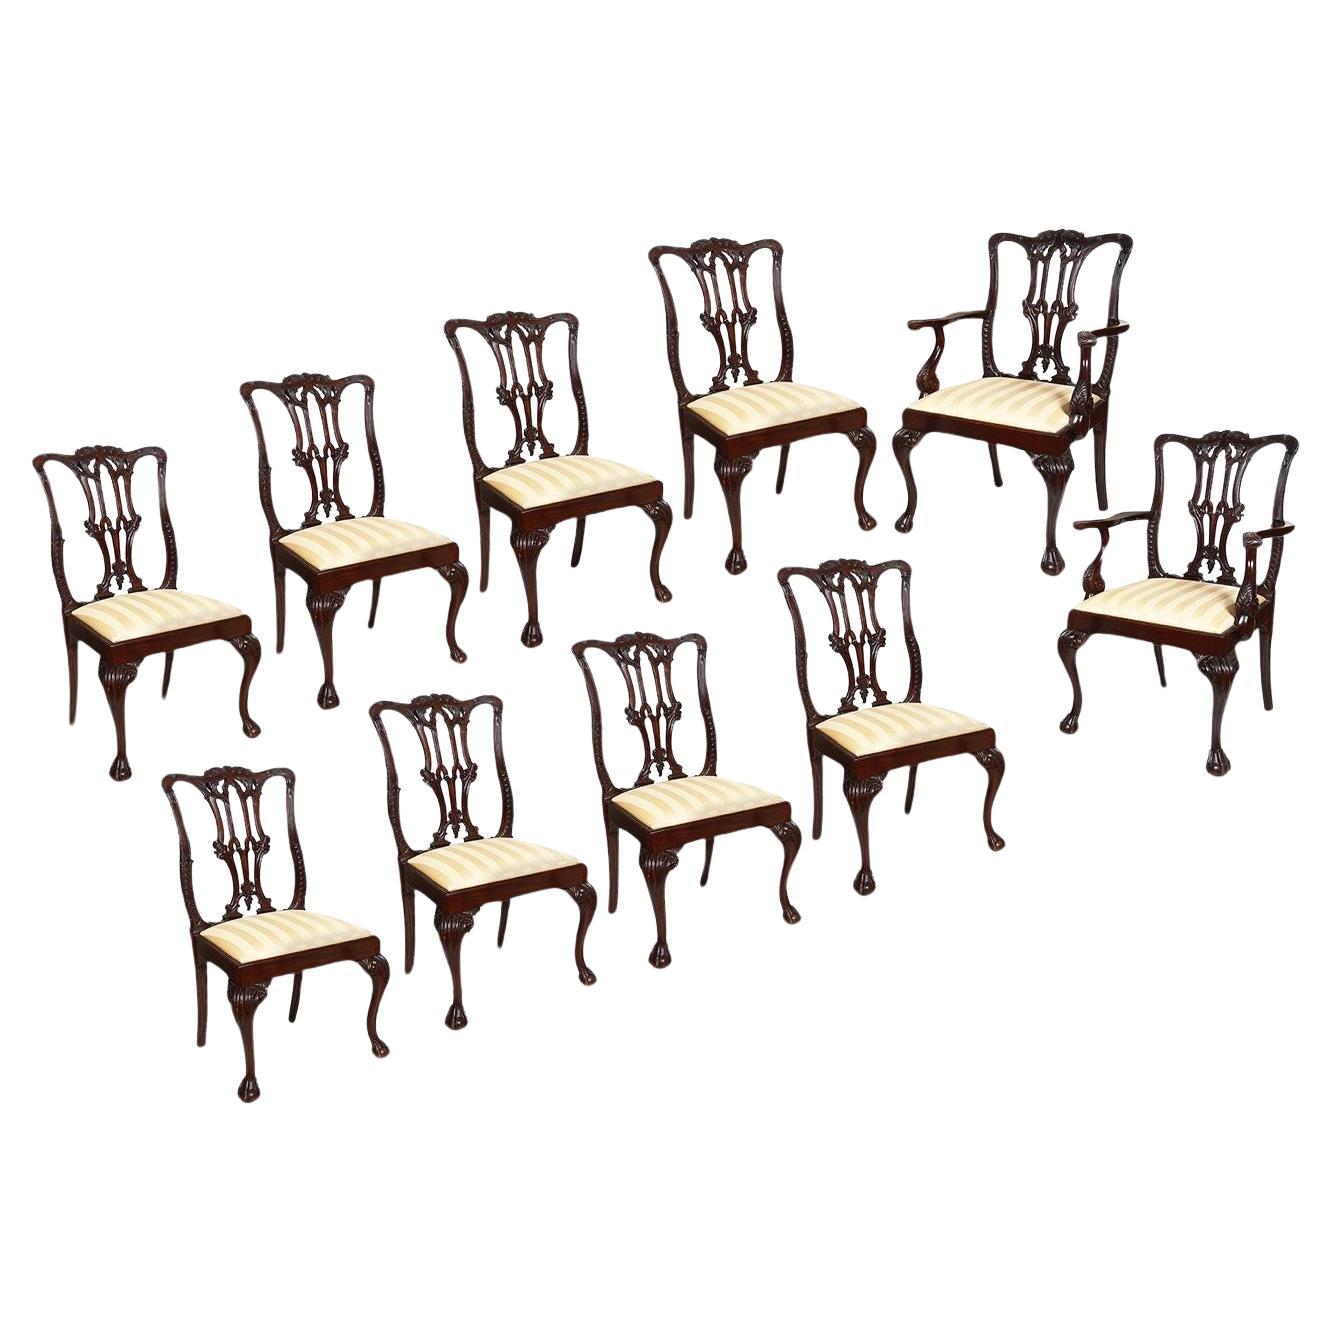 Set of 10 Chippendale style dining chairs, 19th Century.